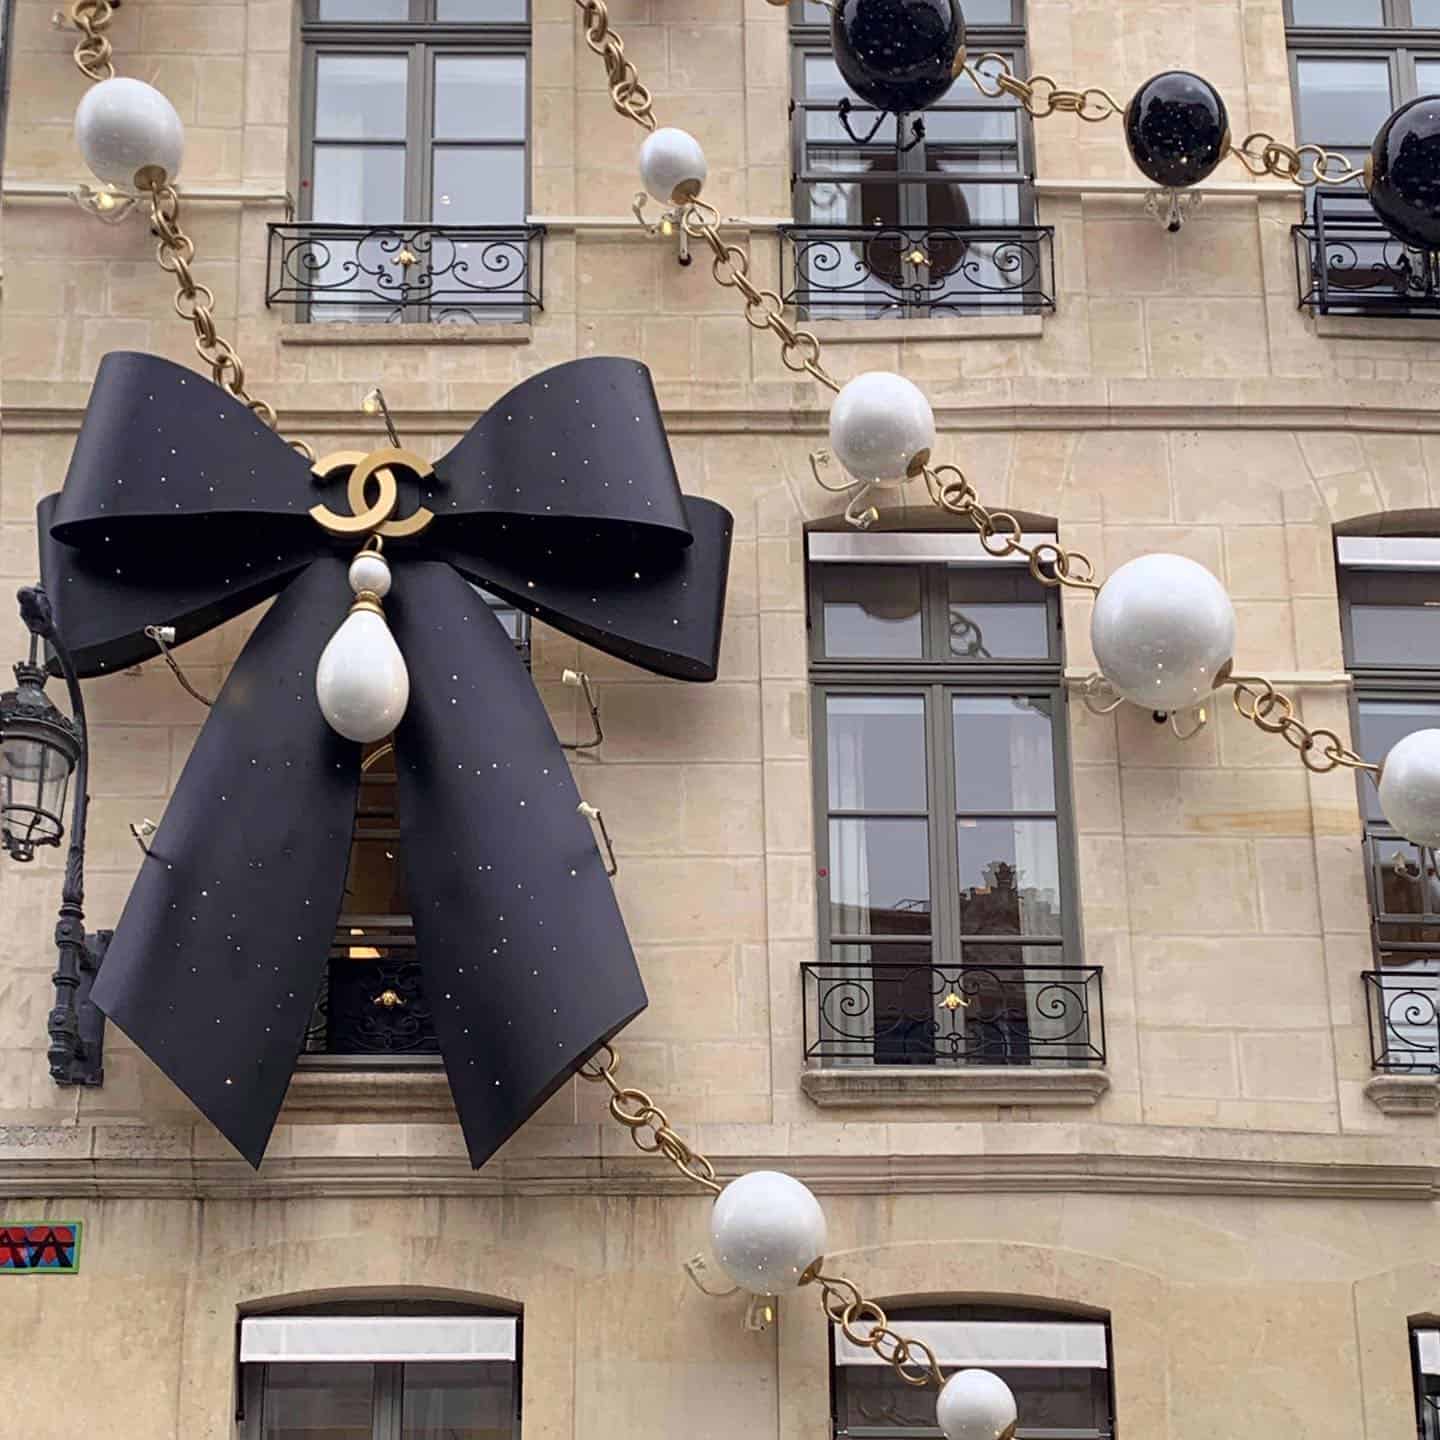 Chanel store in Paris